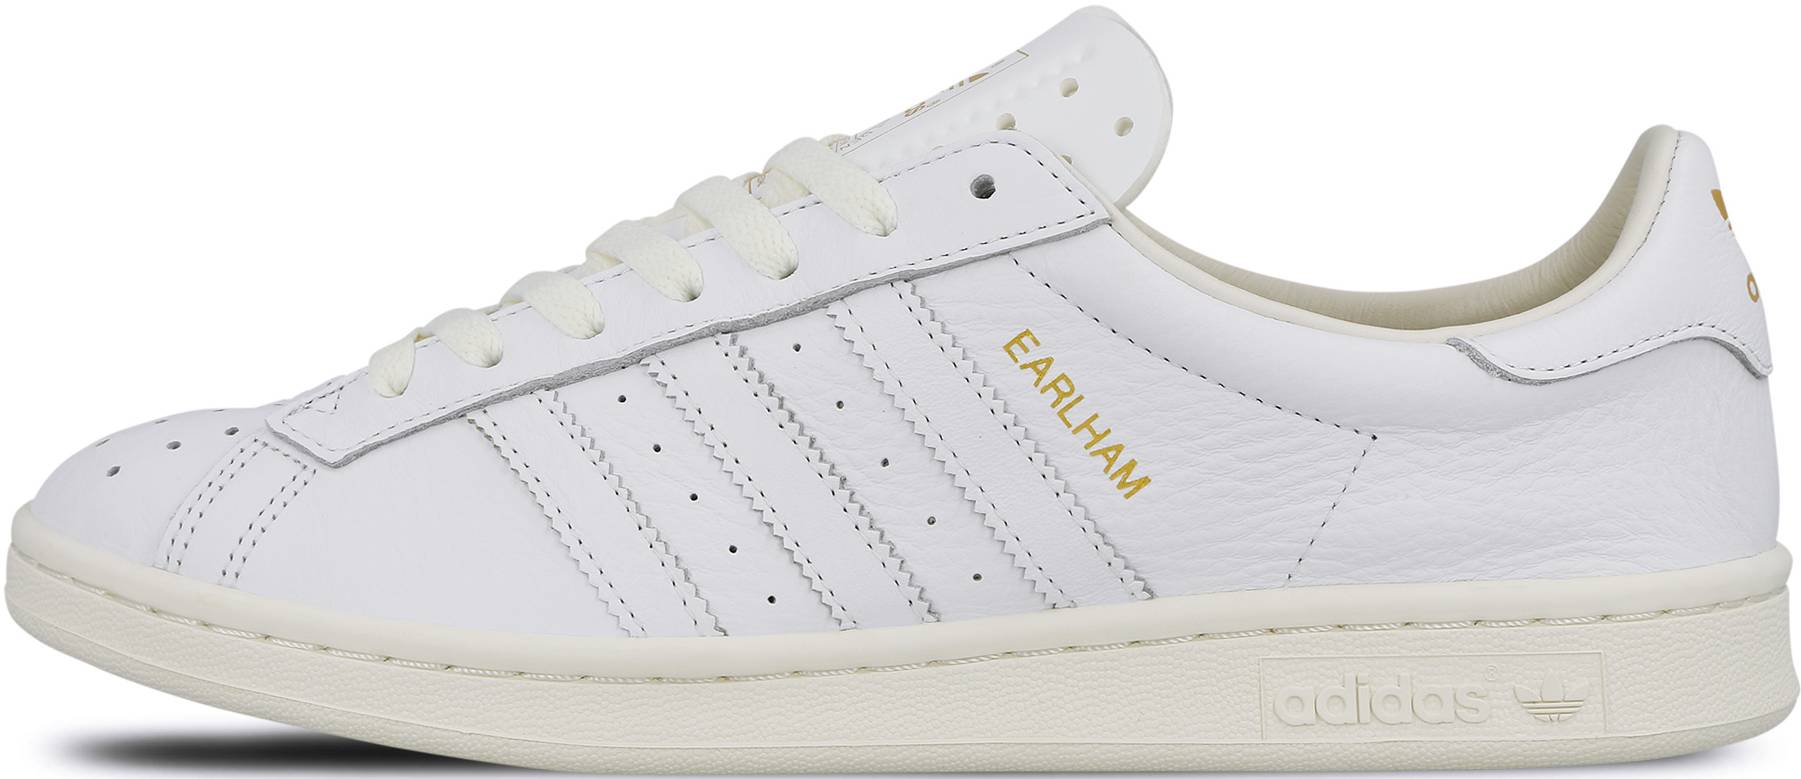 Adidas Earlham SPZL deals from $80 in 